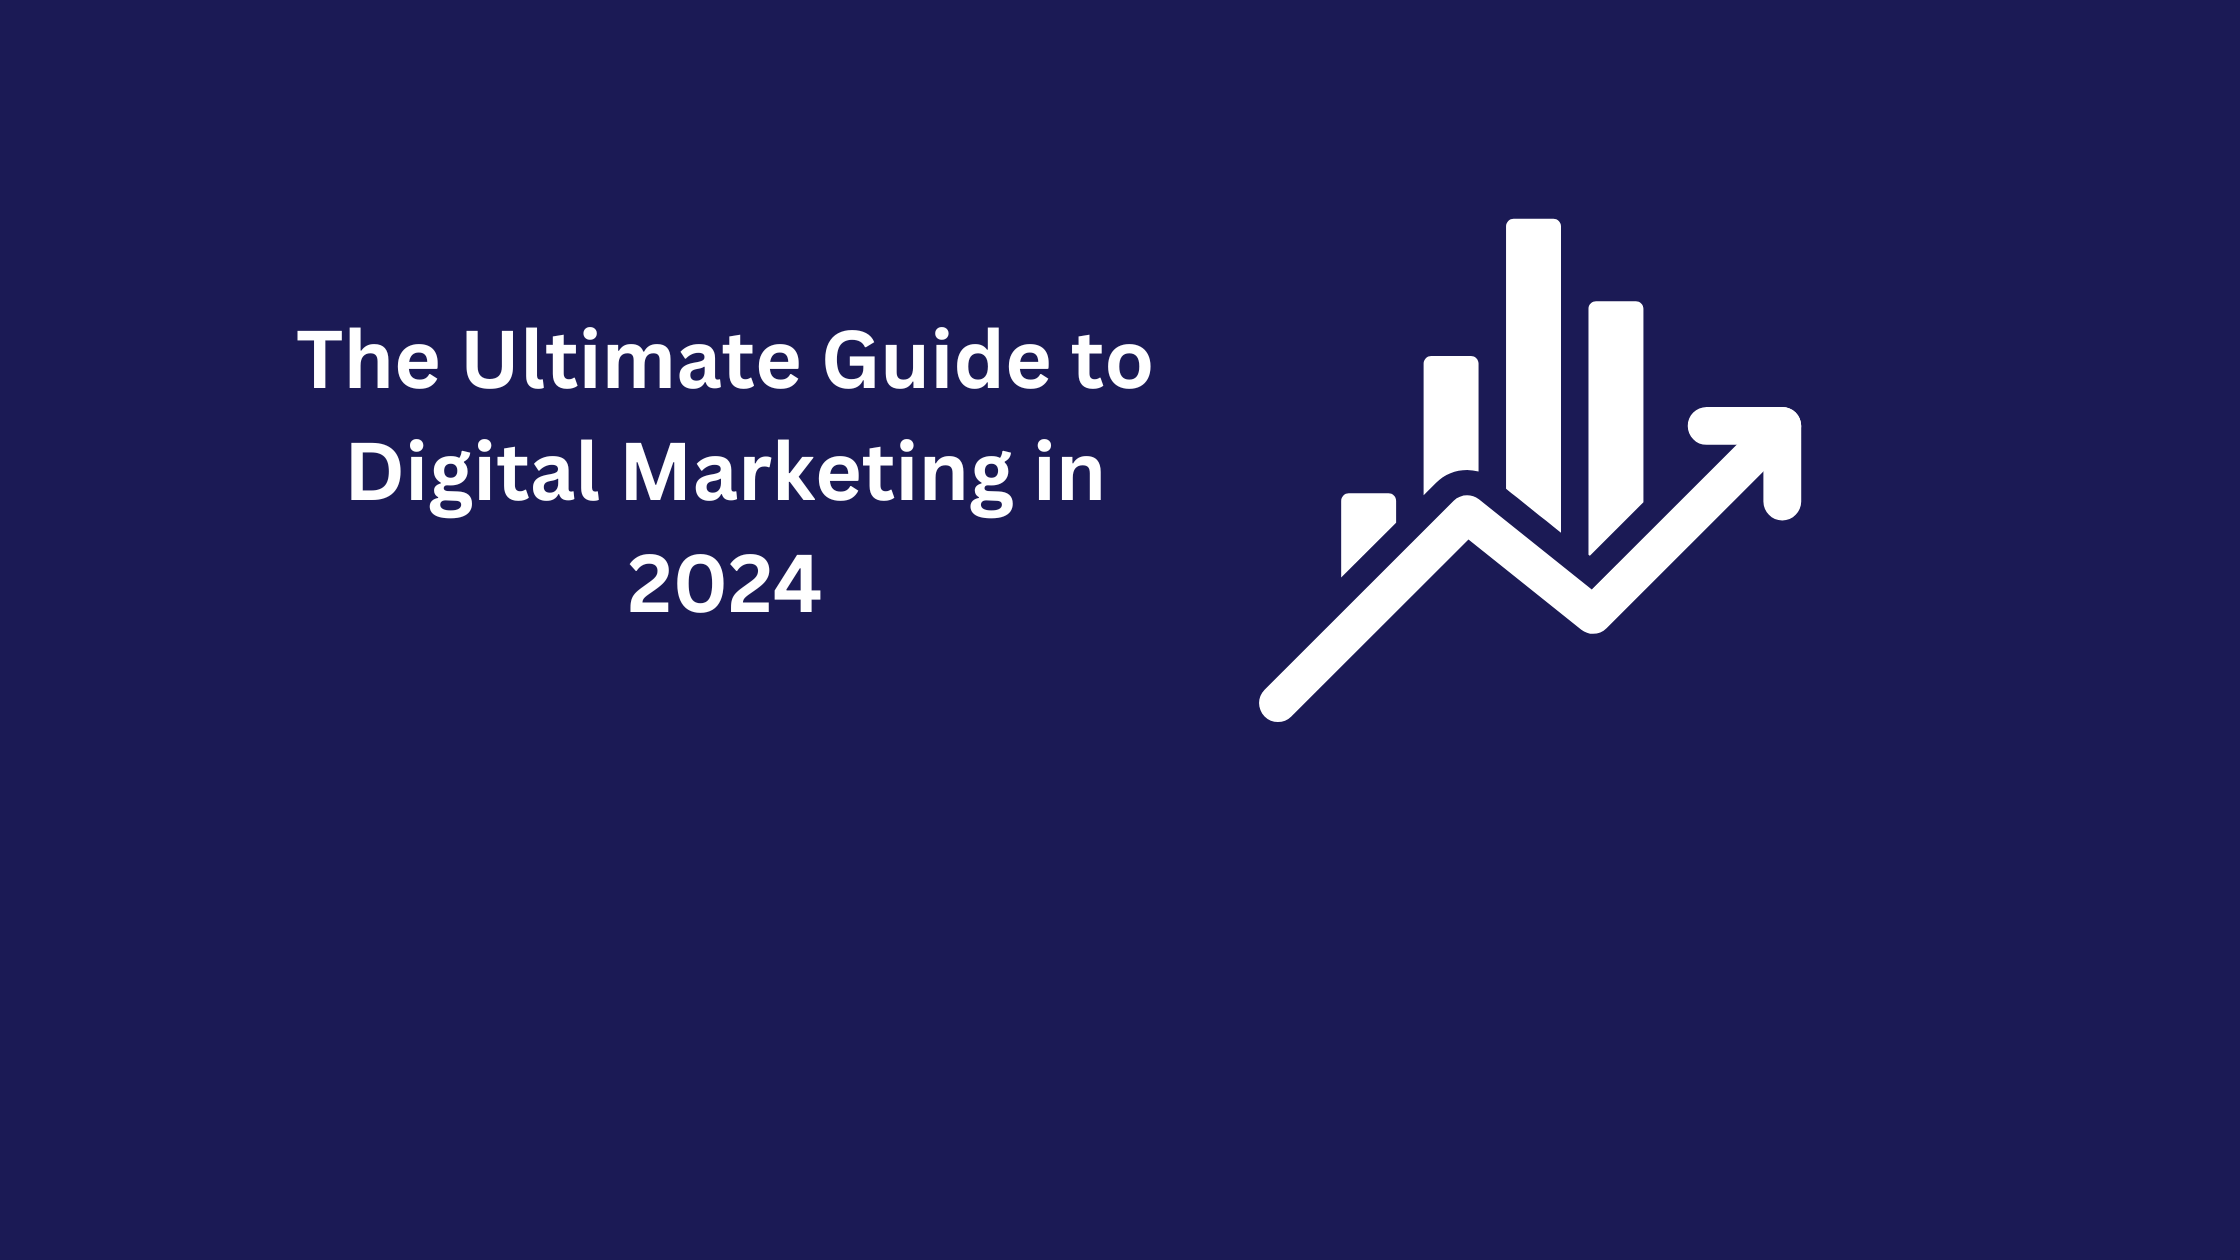 The Ultimate Guide to Digital Marketing in 2024